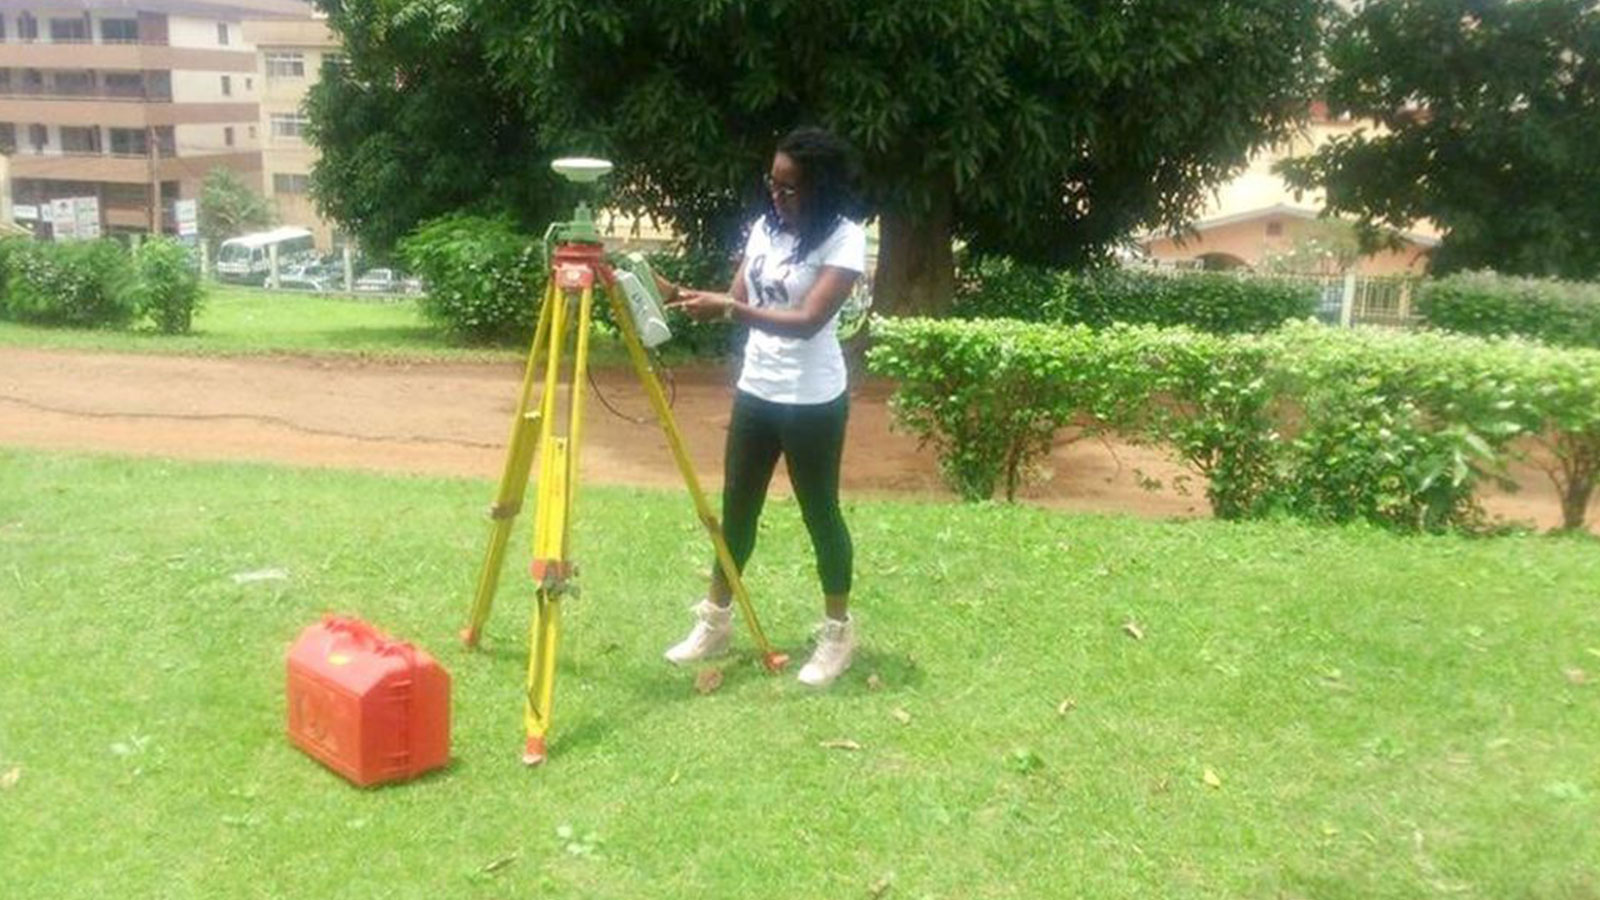 As part of her training work, Marie Makuate shows students how to use surveying equipment